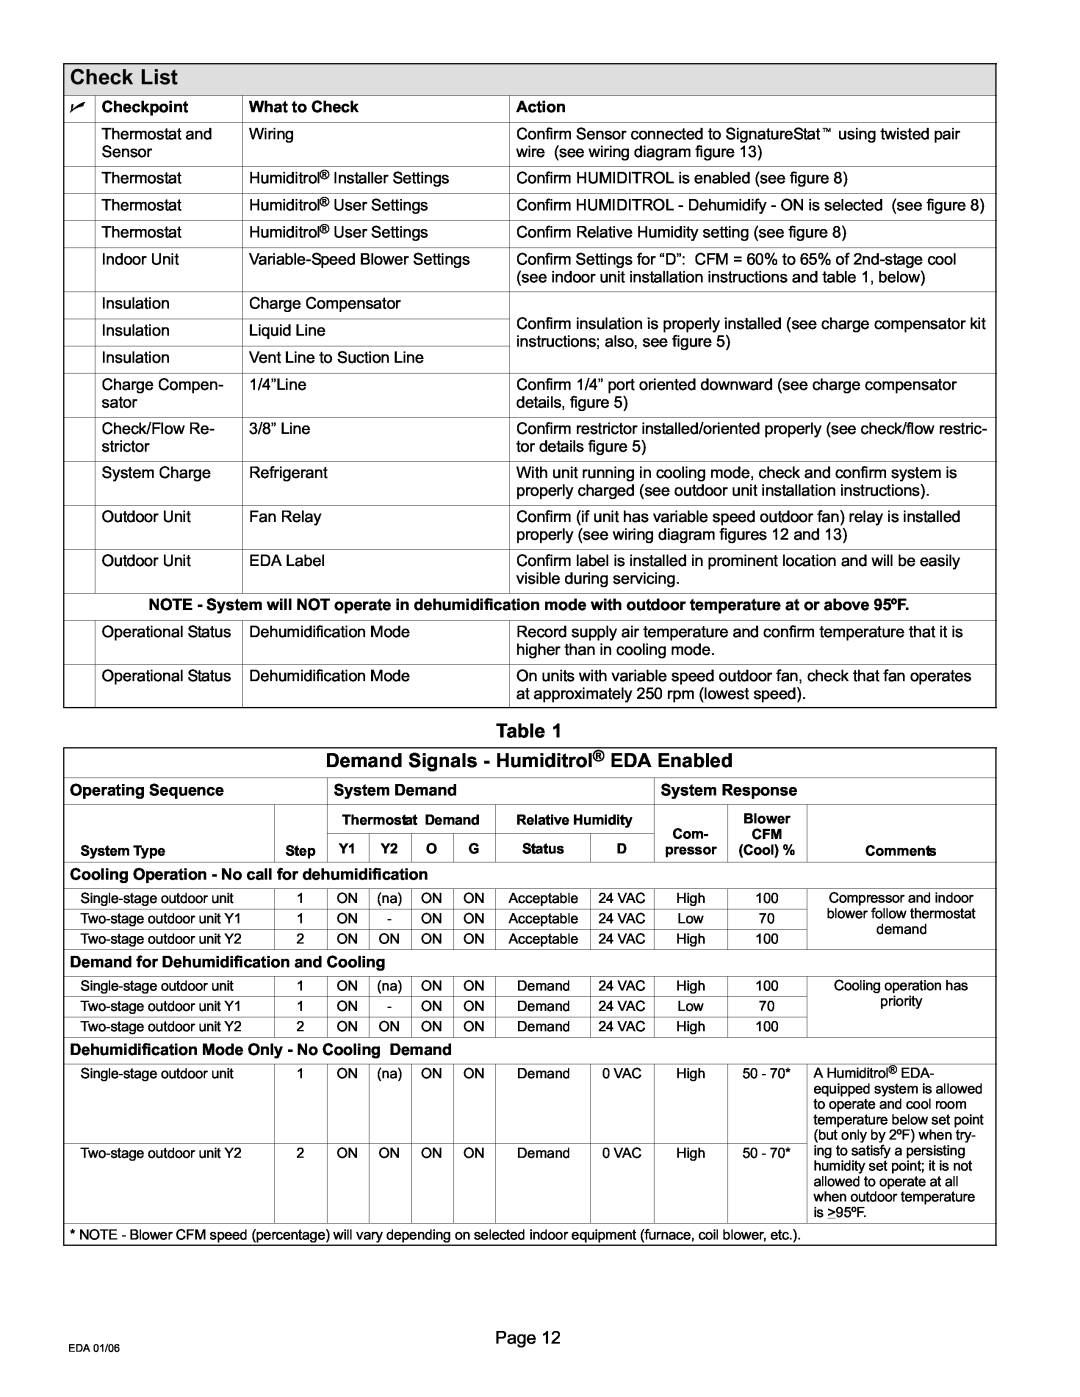 Lennox International Inc 505 Check List, Table Demand Signals − Humiditrol EDA Enabled, instructions; also, see figure 